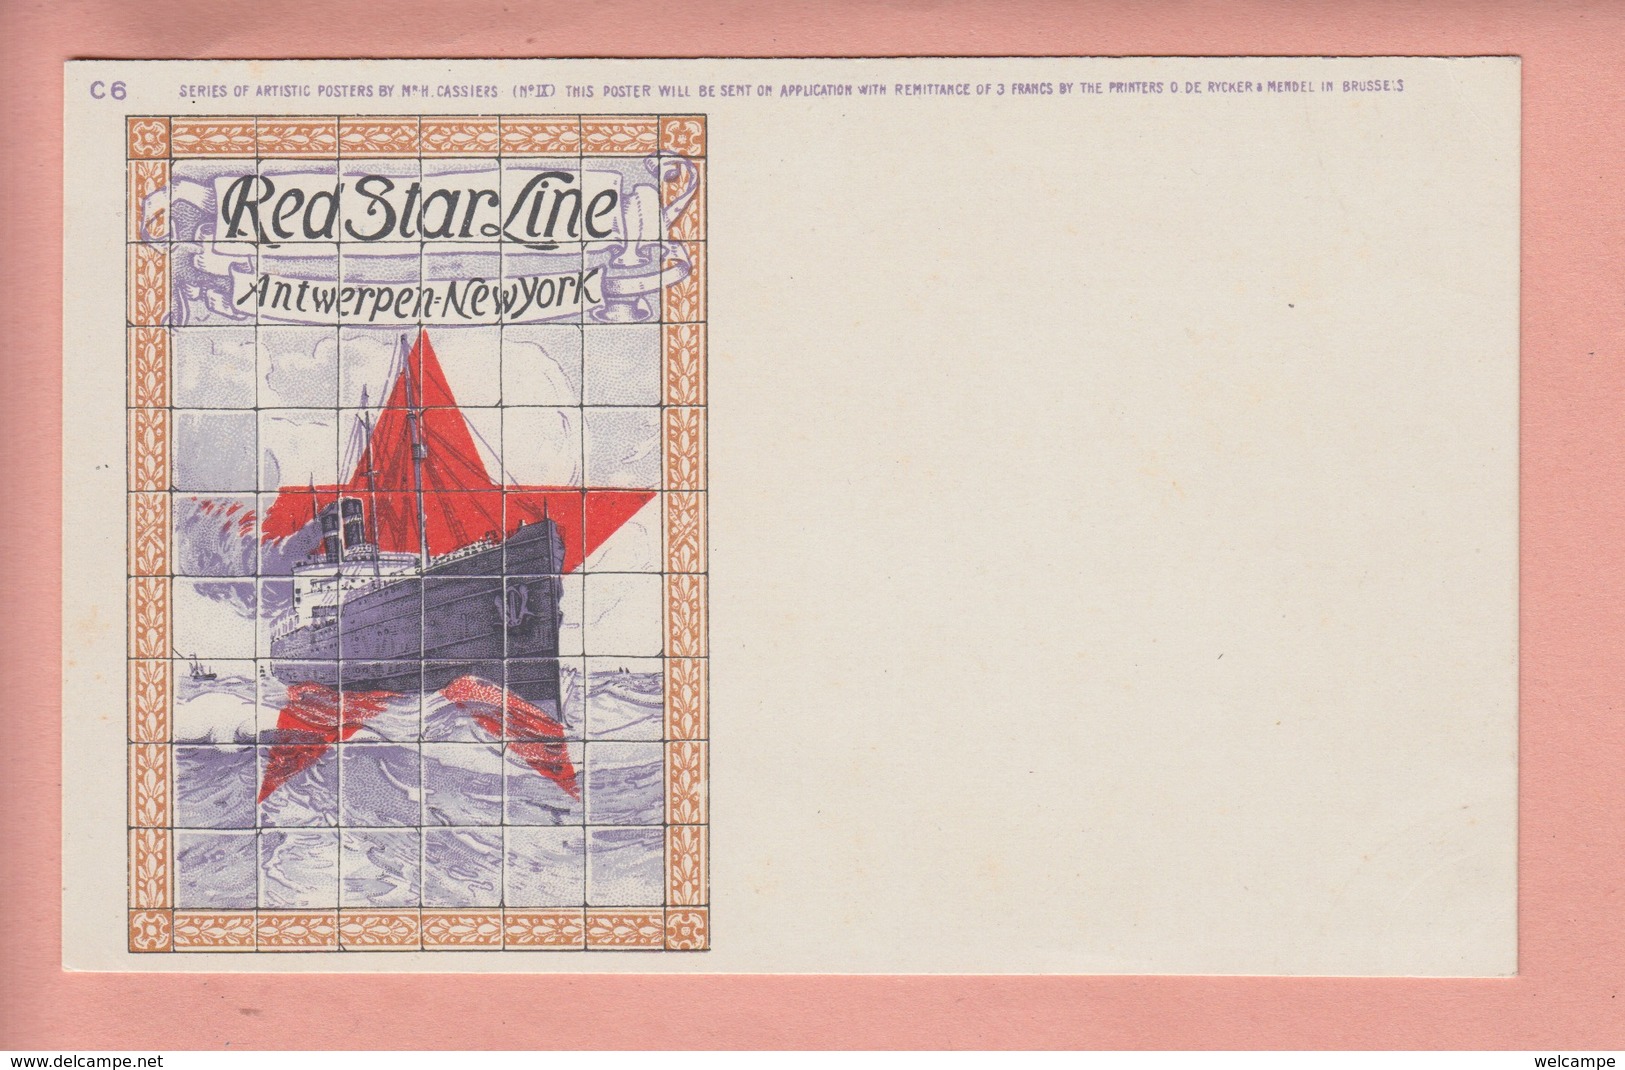 OLD POSTCARD POSTER ART CASSIERS - SHIPPING - RED STAR LINE - ANTWERP NEW YORK - Advertising